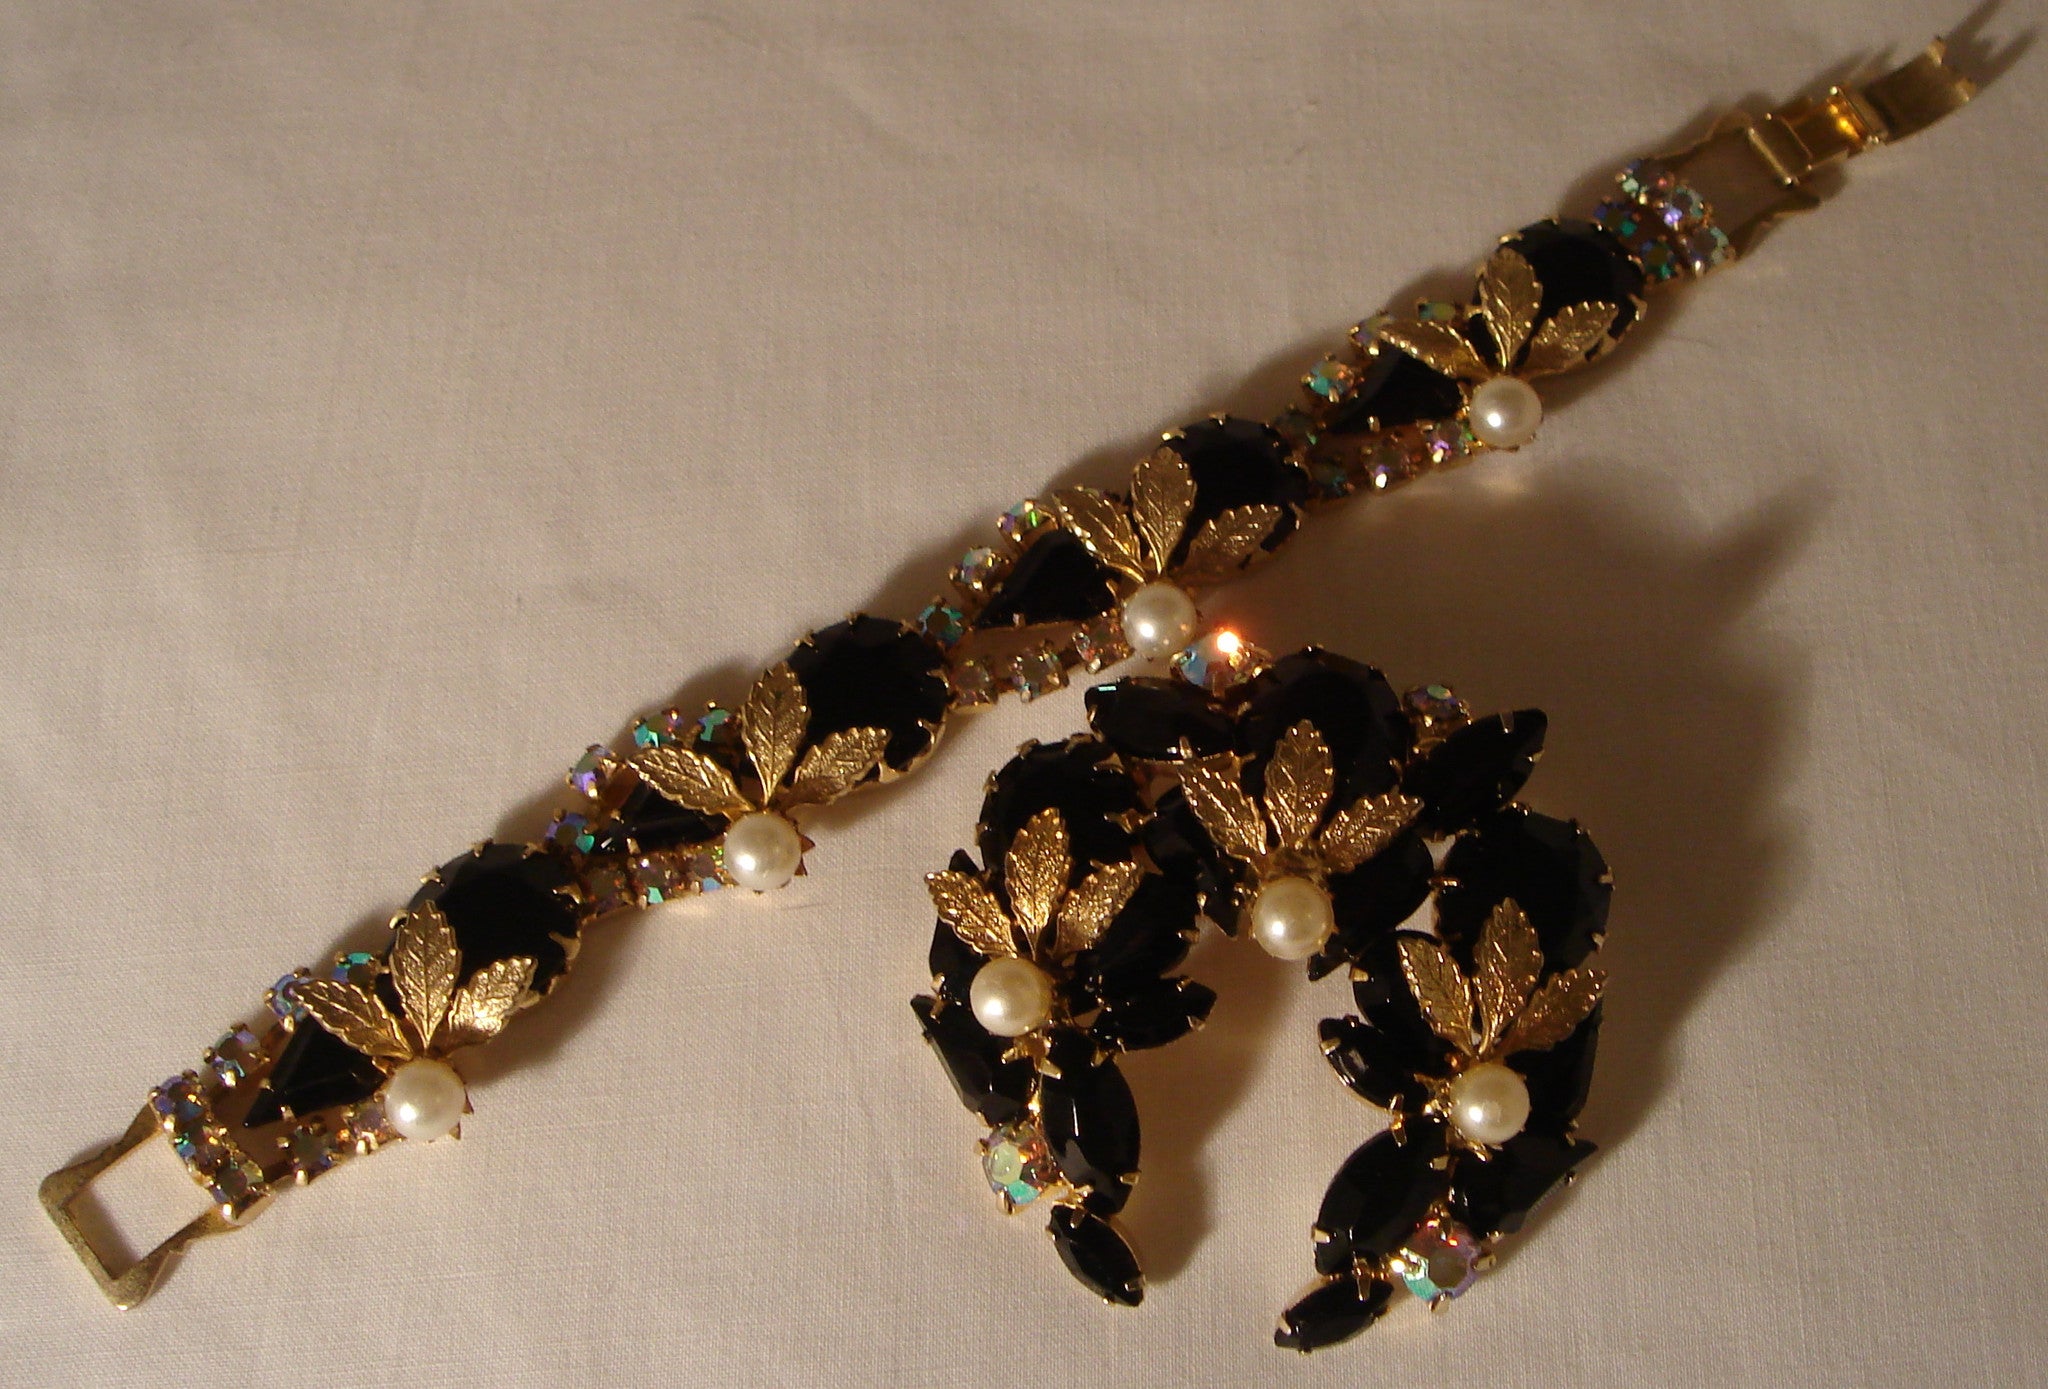 WEISS - Bracelet & Brooch!- Jet - Aurora Borealis crystal - Pearl (faux) - gold tone leaves